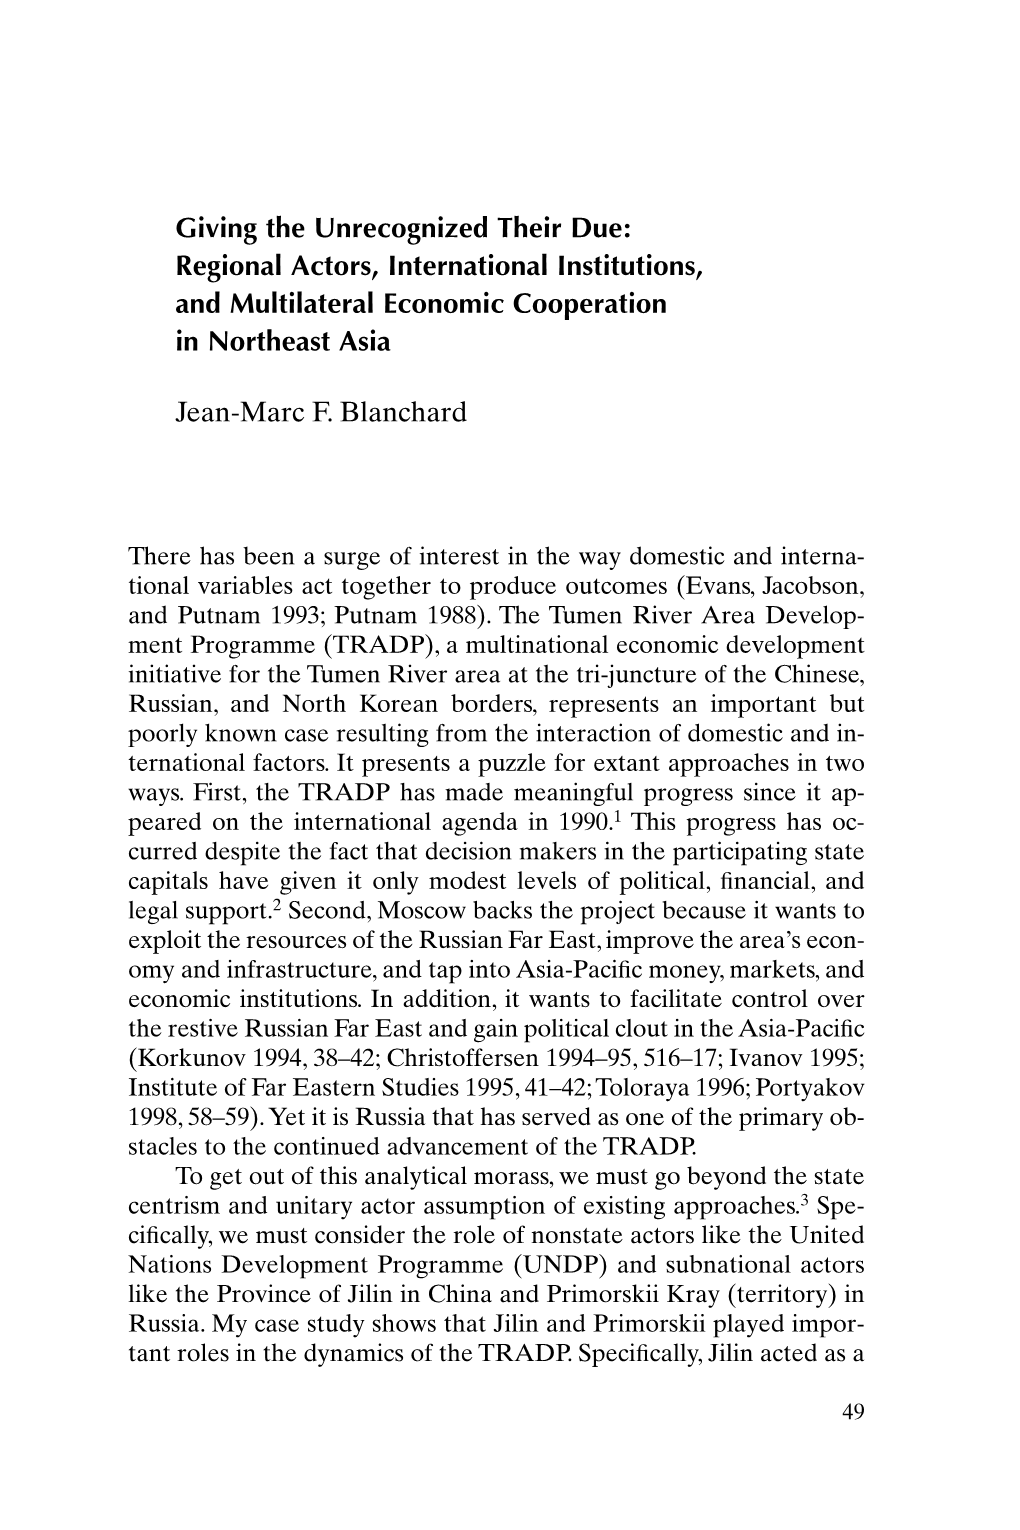 Regional Actors, International Institutions, and Multilateral Economic Cooperation in Northeast Asia